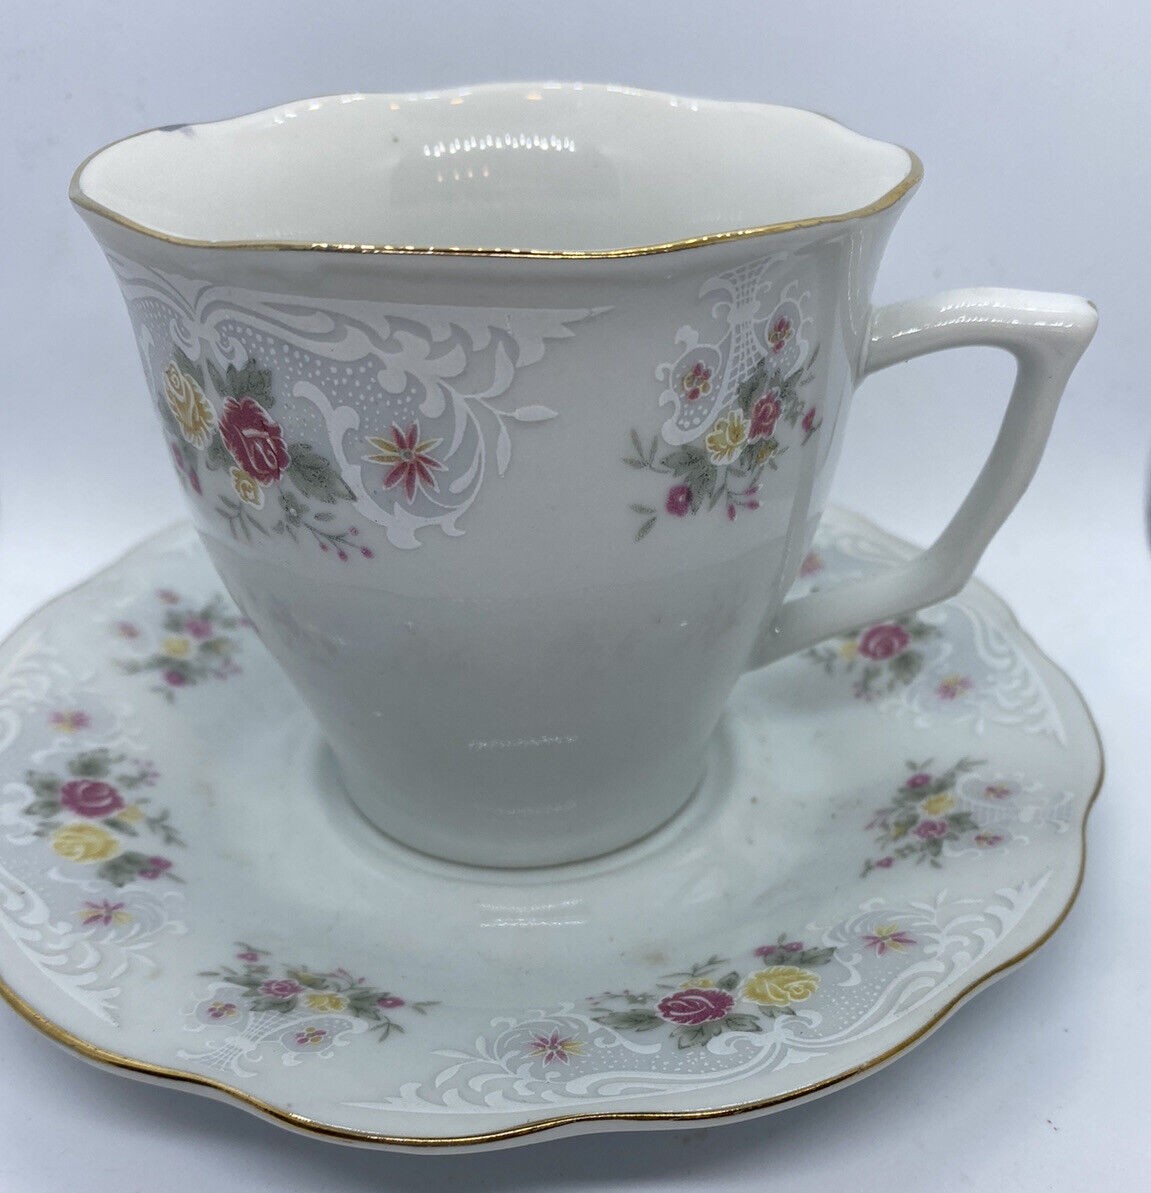 Floral Tea Cup and Saucer Gold Rim by Allied Design